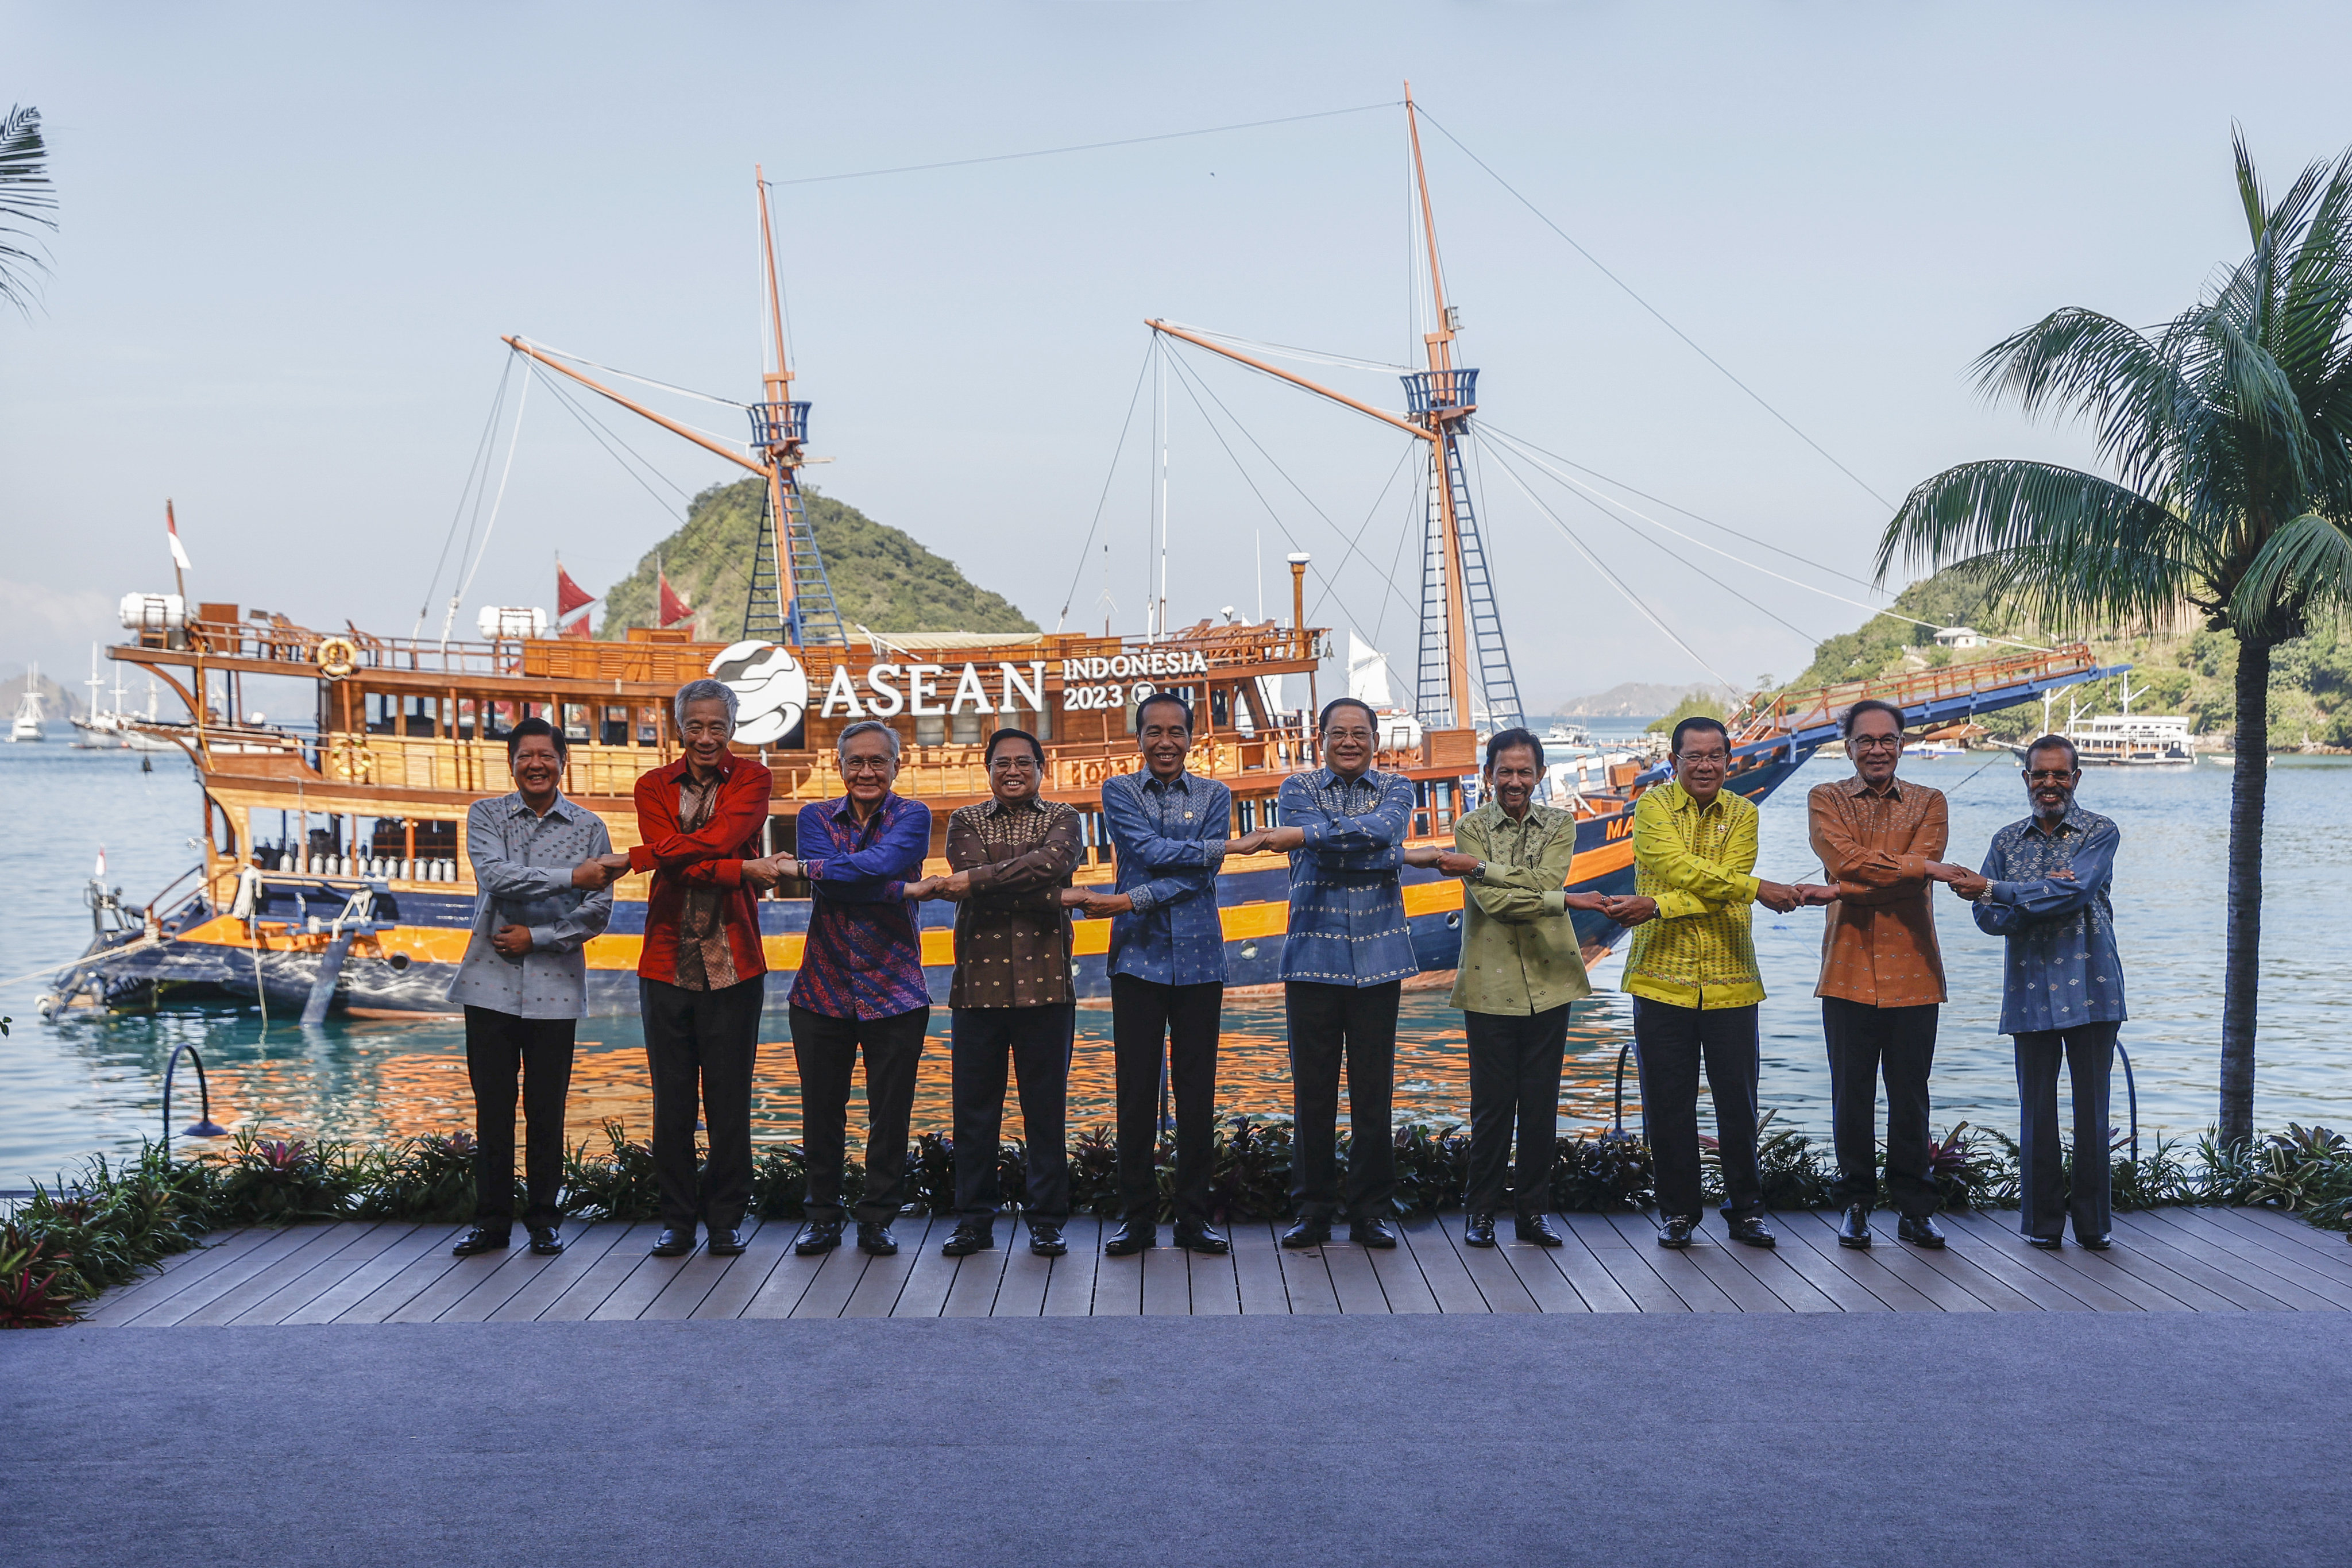 Asean leaders hold hands for a group photo during a summit in Labuan Bajo, Indonesia, on May 11. Photo: AP
